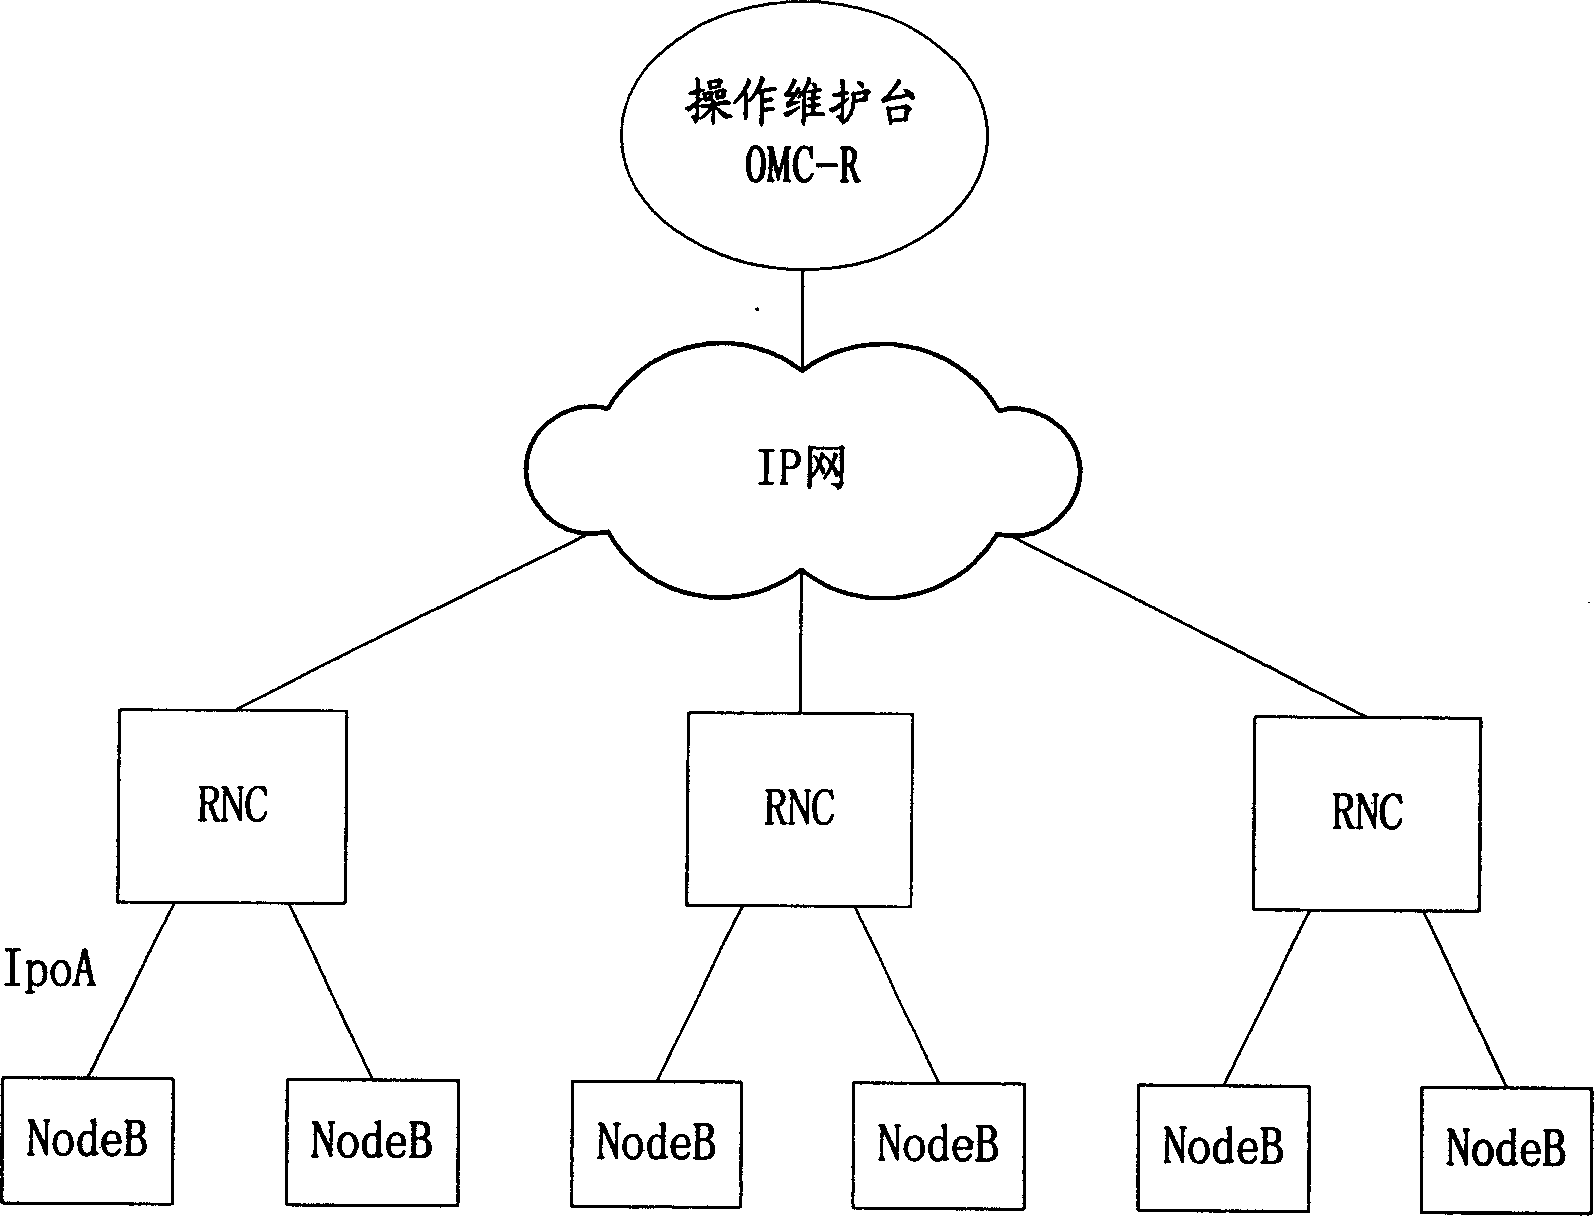 Method for dynamic confugerating permanent virtual circuit and intel network address by radio network controller